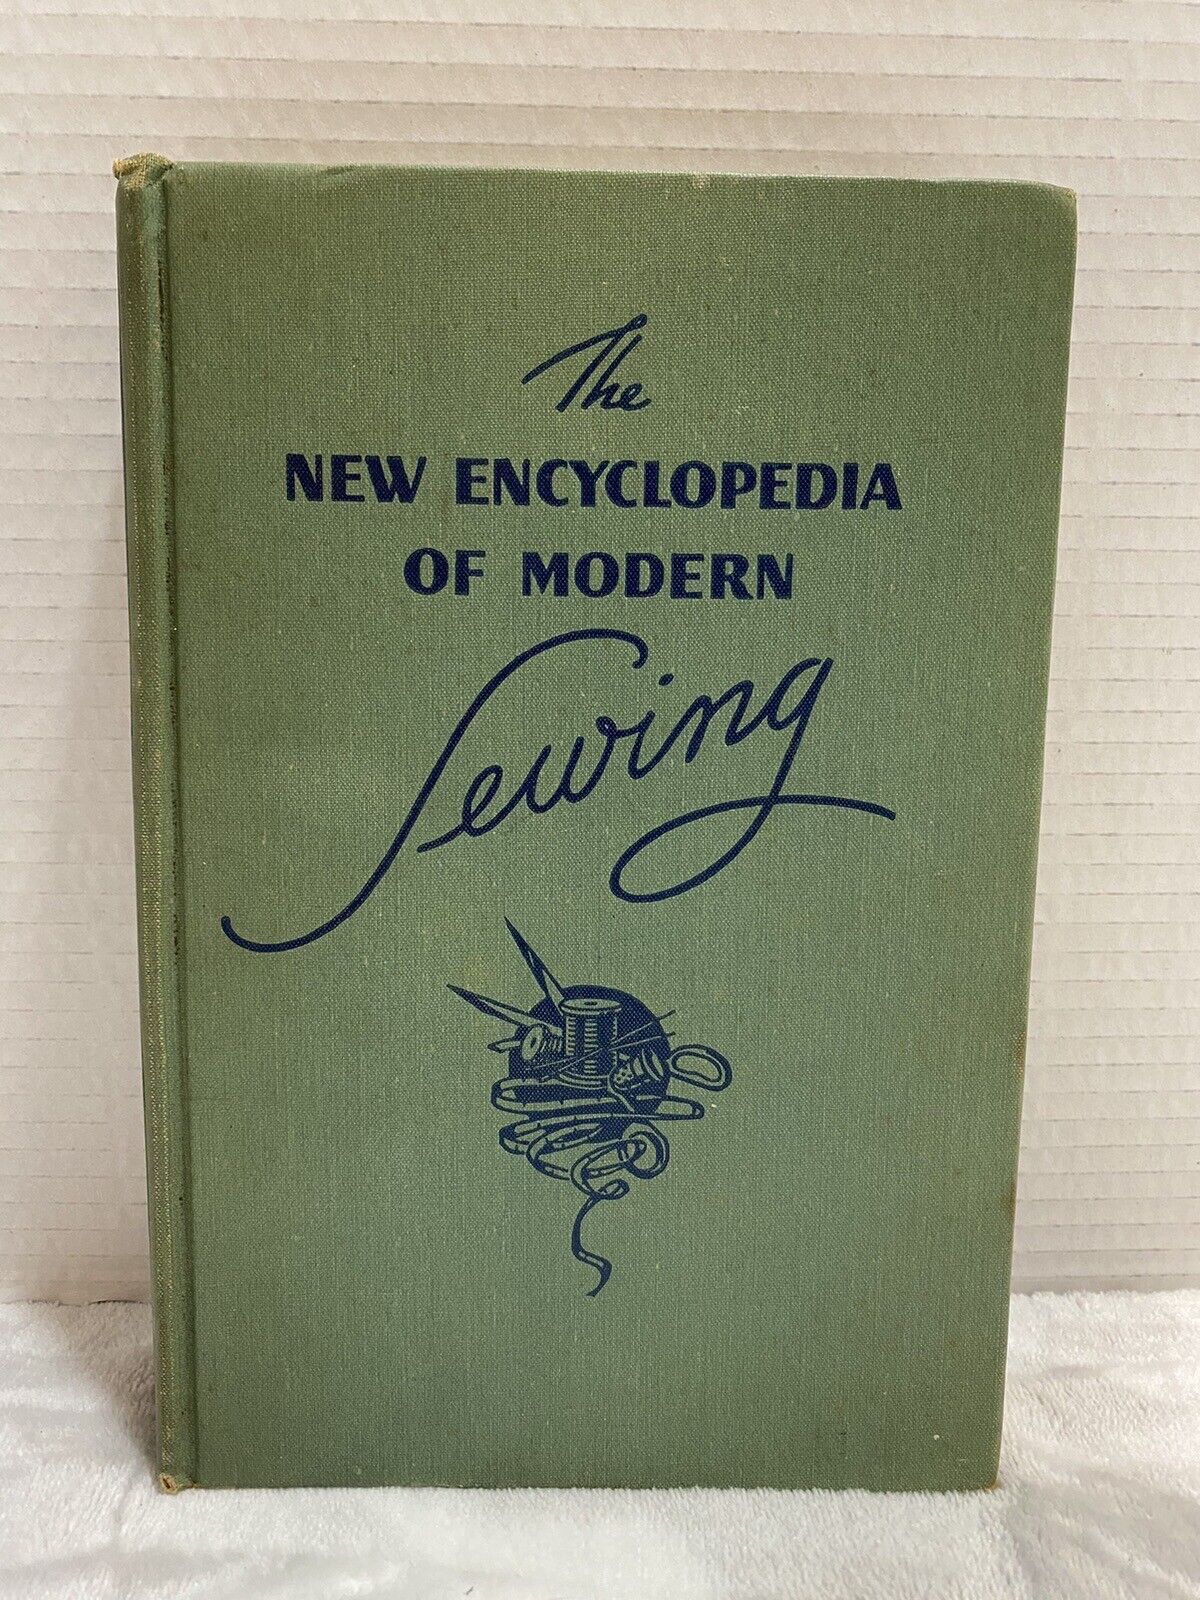 1946 The New Encyclopedia of Modern Sewing Hardcover Third Edition VTG